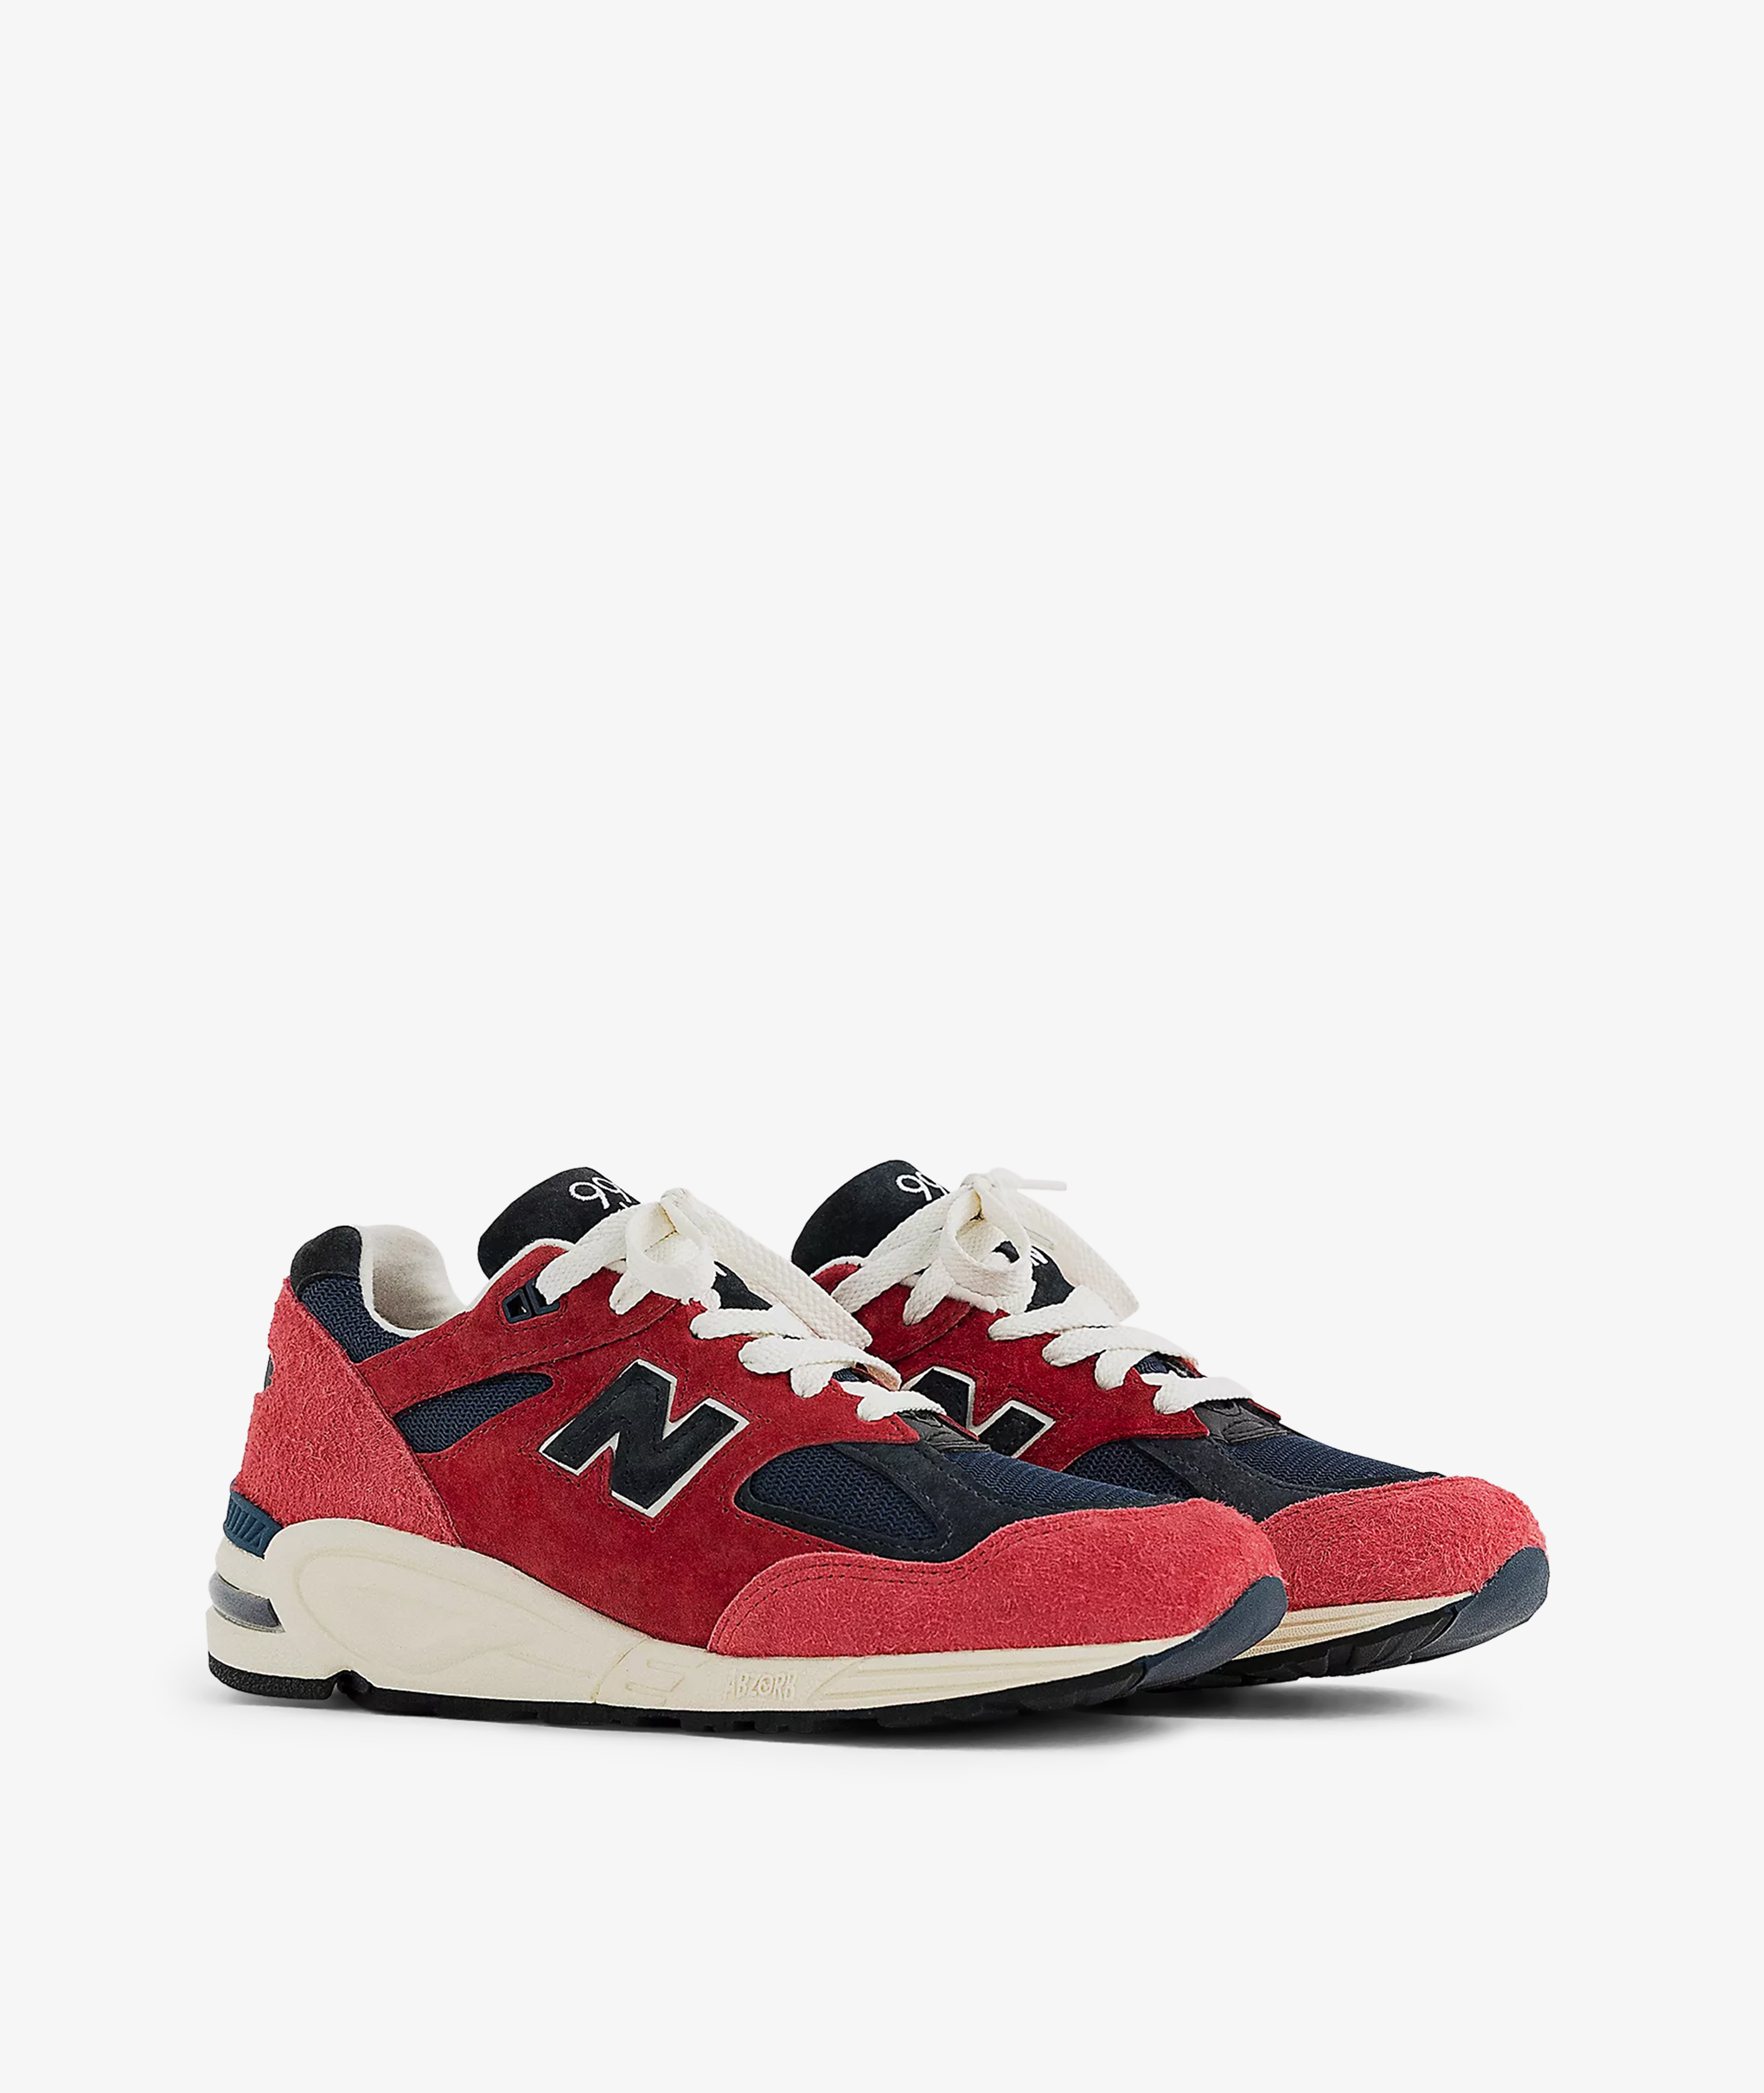 Norse Store | Shipping Worldwide - New Balance MR990V2 - RED / WHITE